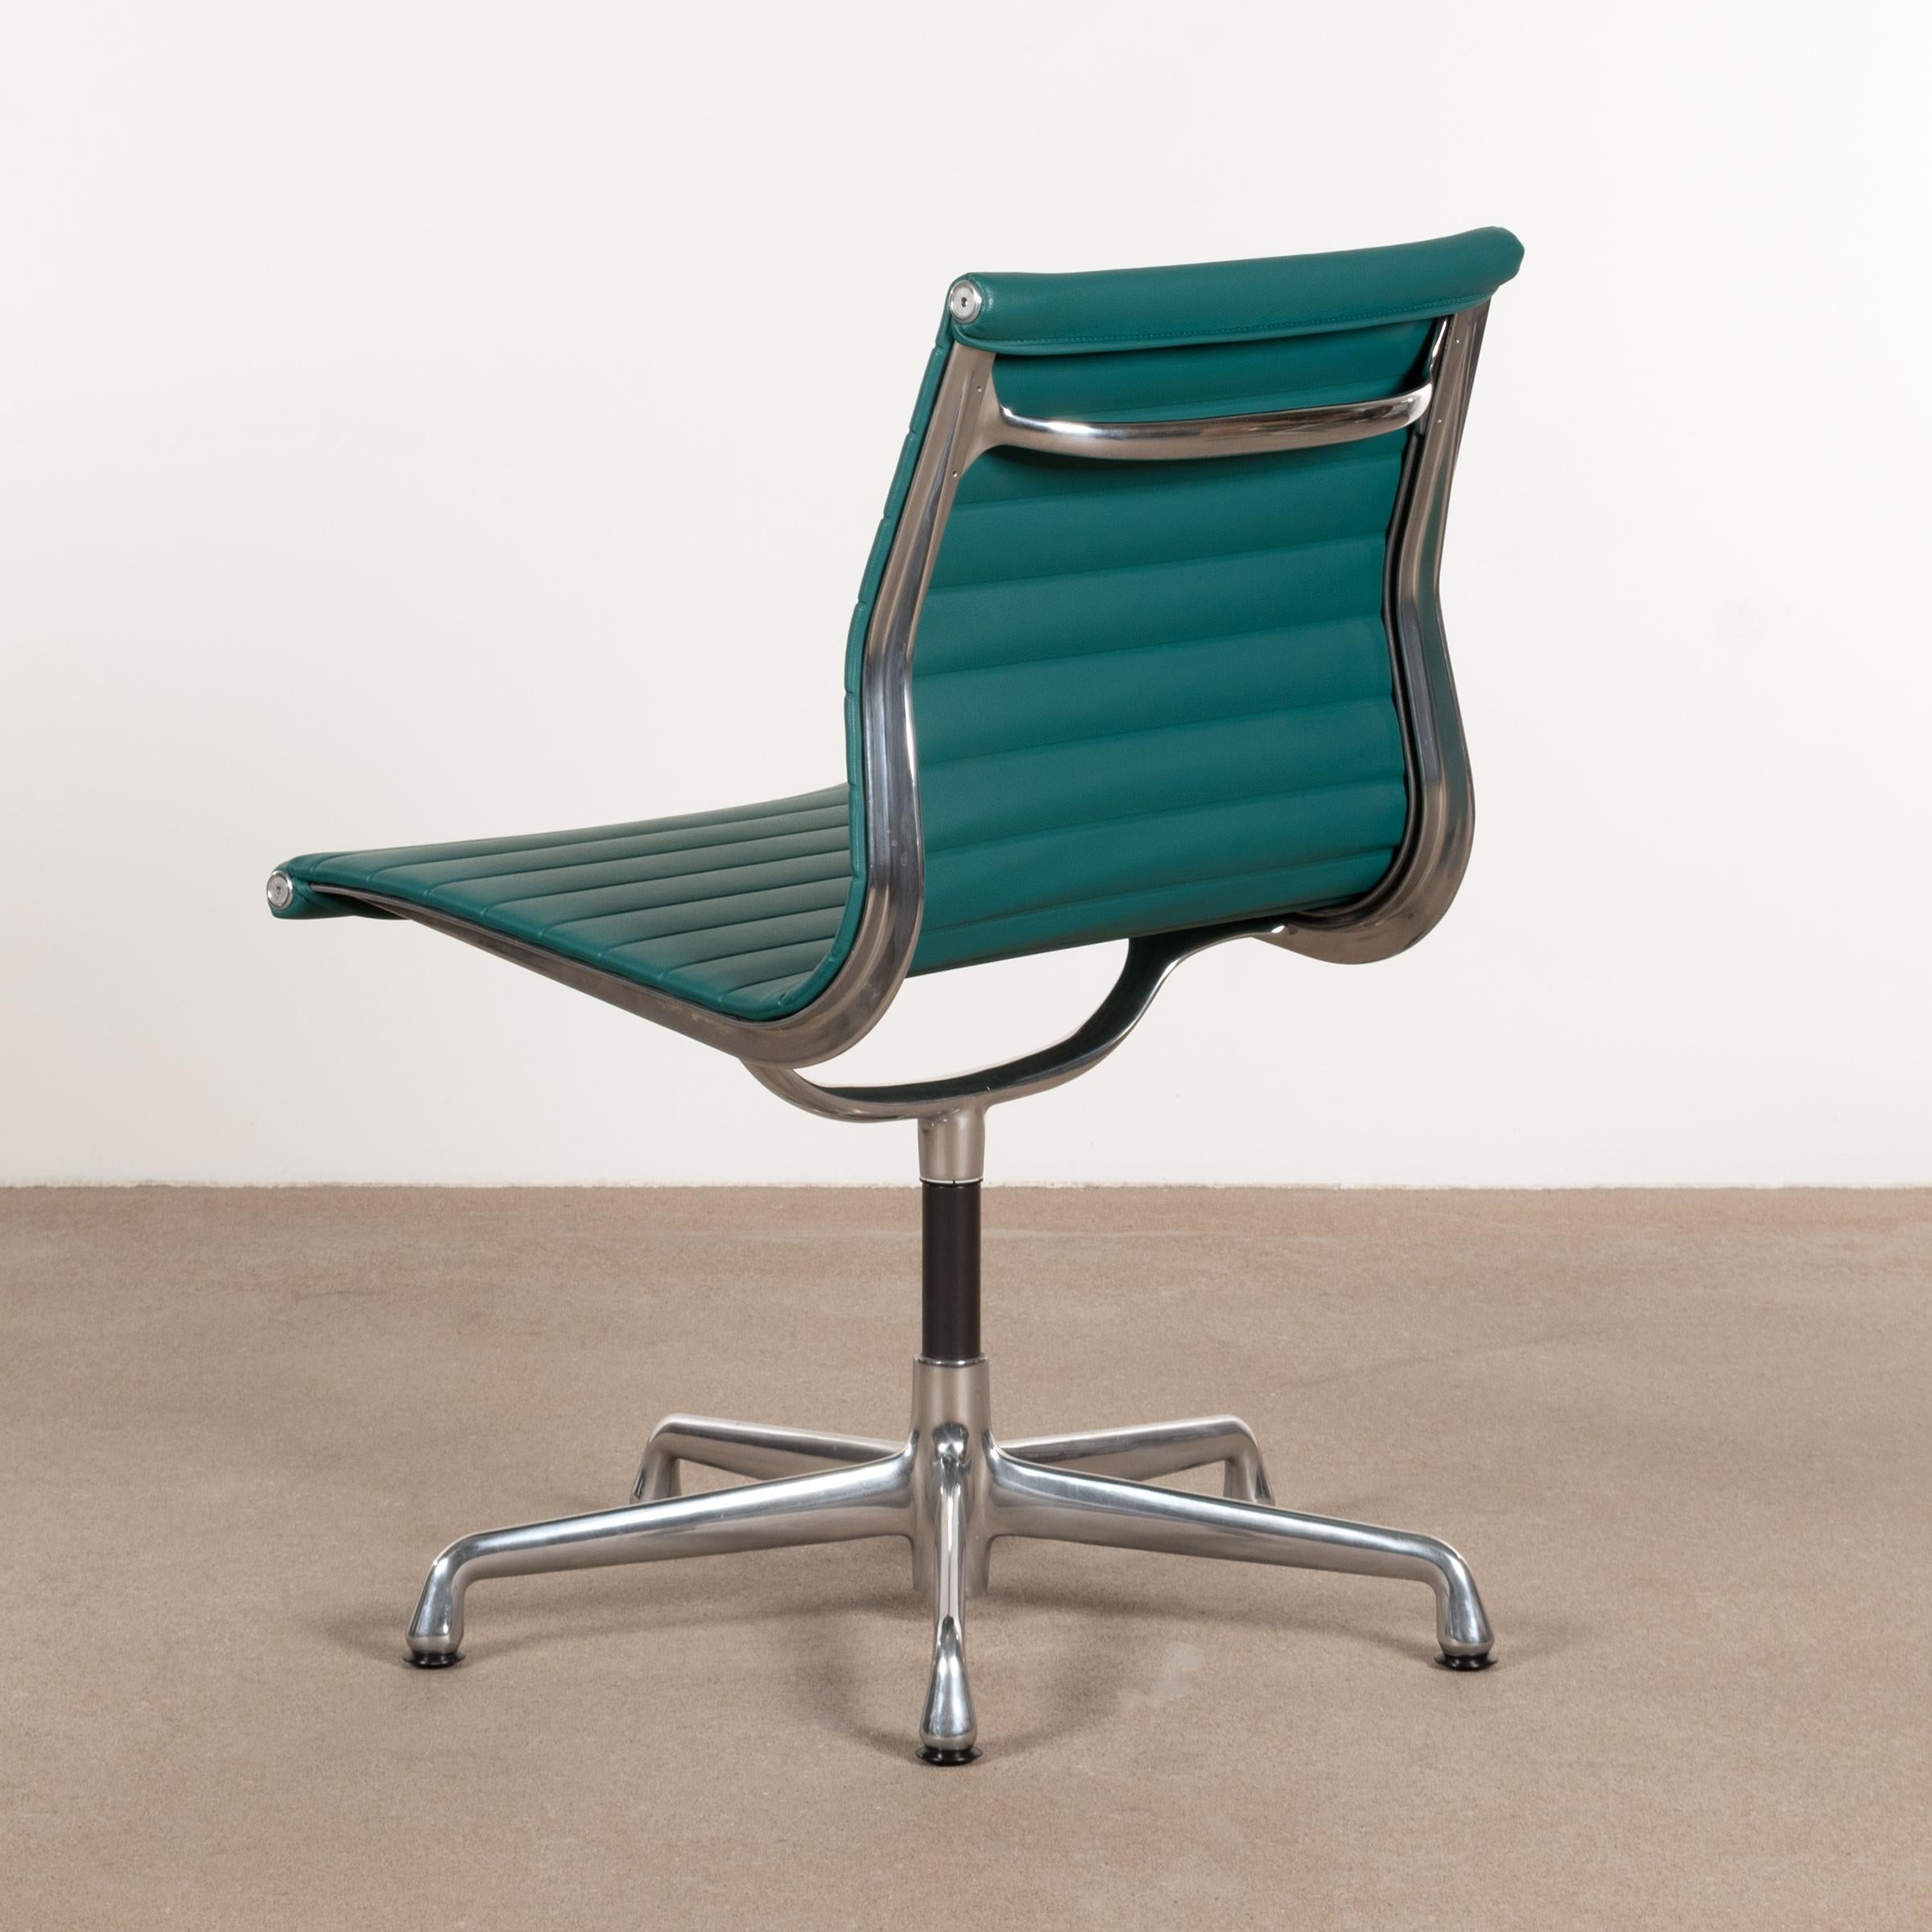 Mid-Century Modern Eames Conference Chair in Turquoise Vinyl for Herman Miller, USA